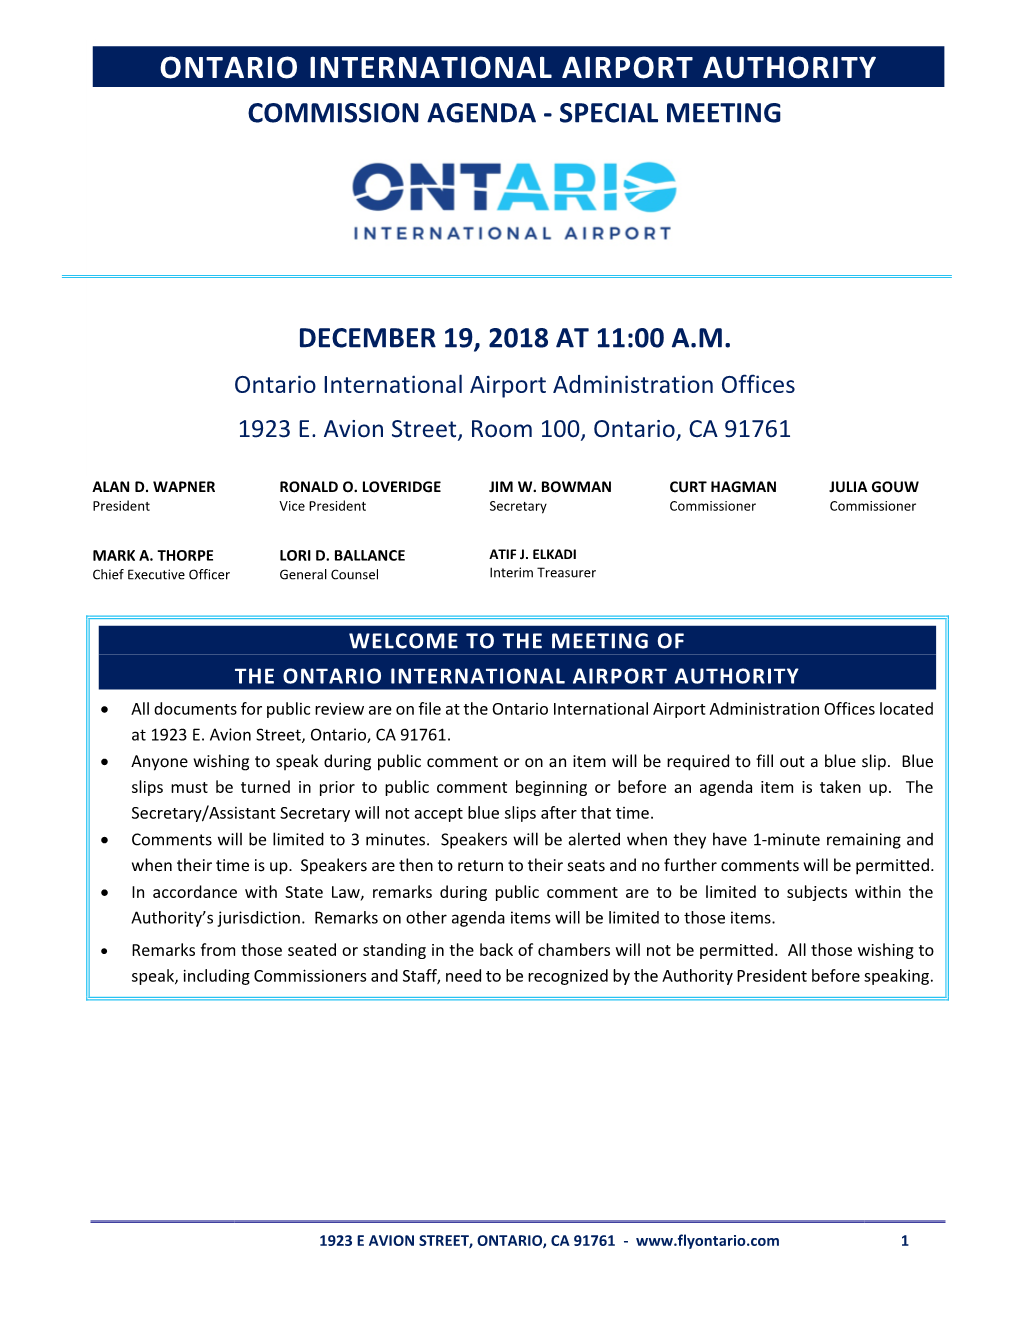 Ontario International Airport Authority Commission Agenda - Special Meeting